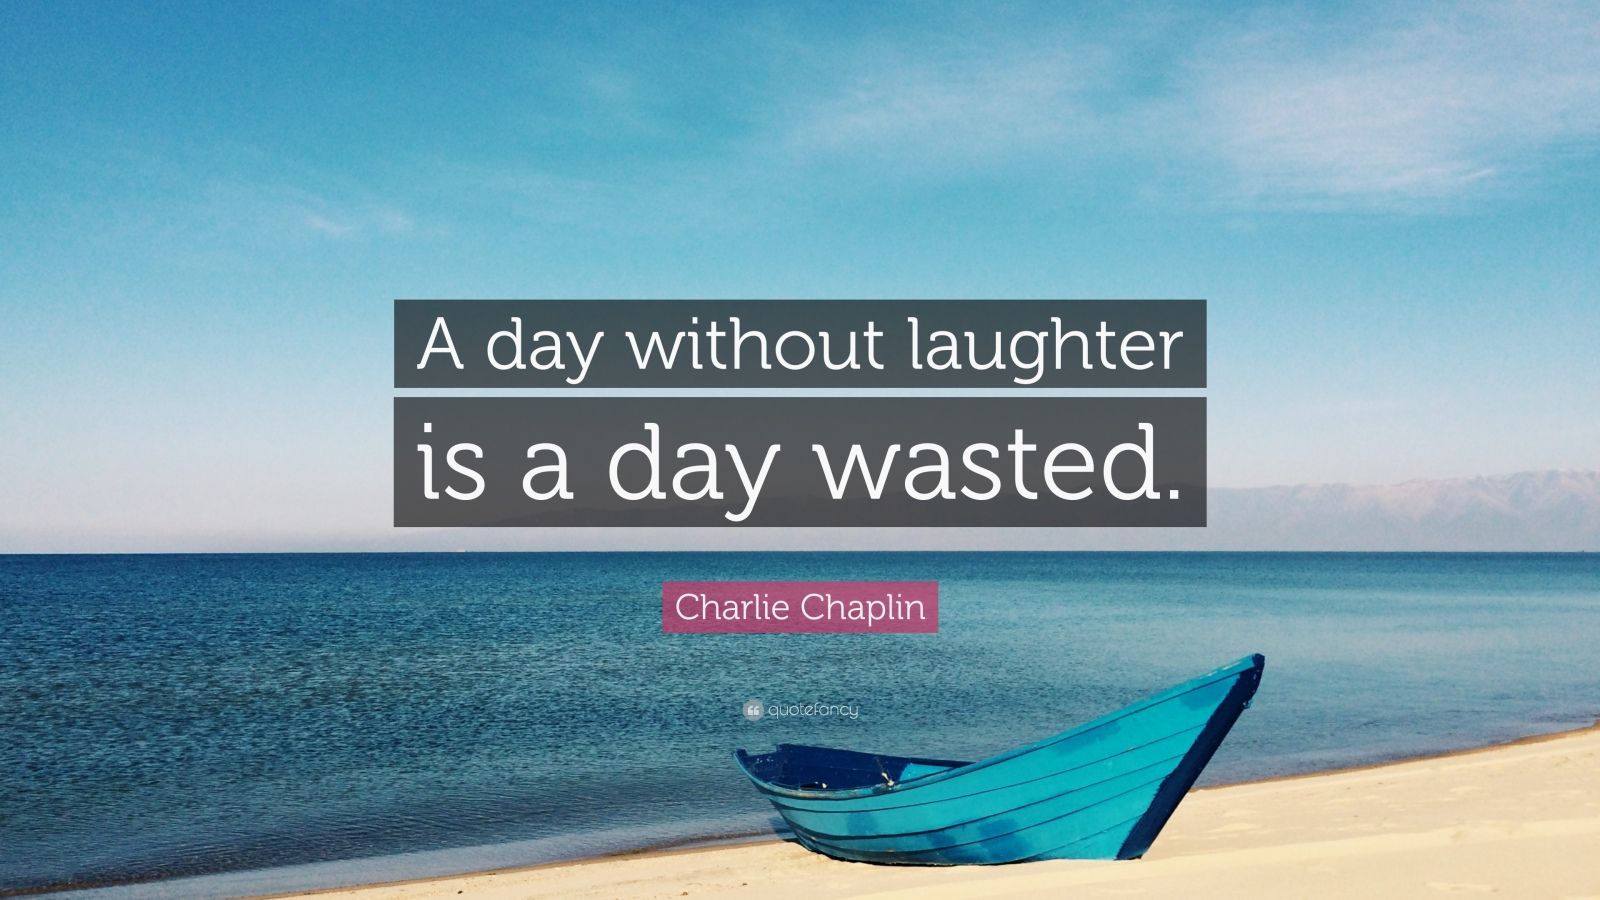 charlie-chaplin-quote-a-day-without-laughter-is-a-day-wasted-12